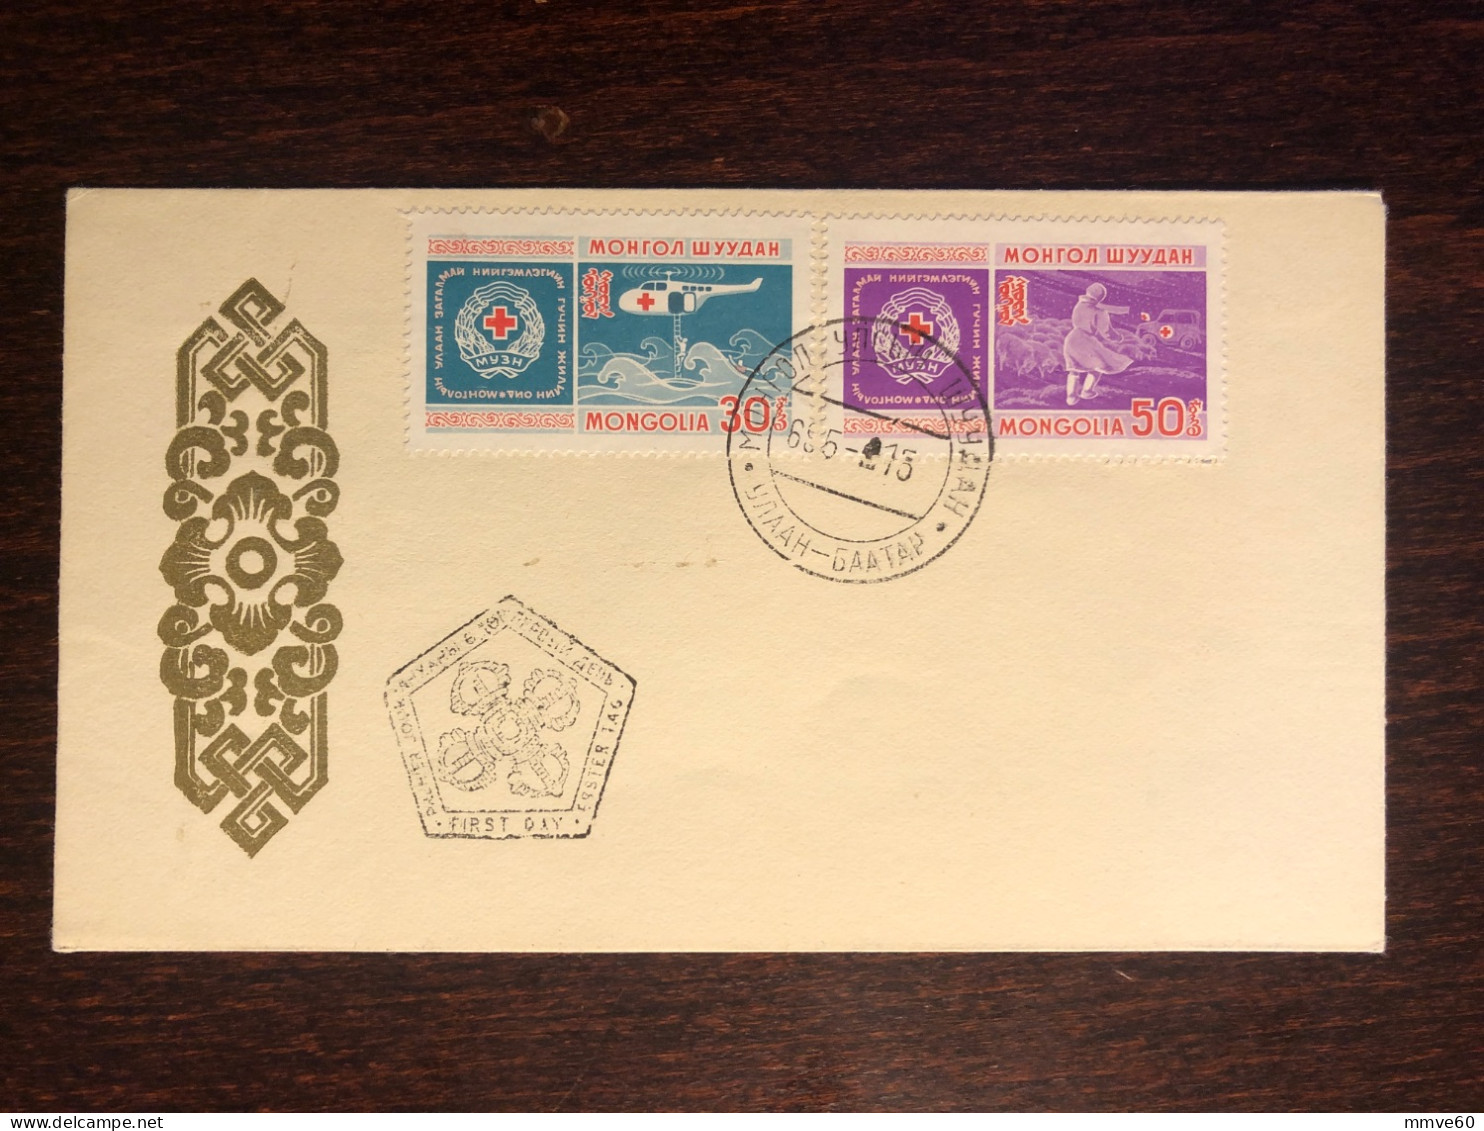 MONGOLIA FDC COVER 1969 YEAR RED CROSS HEALTH MEDICINE STAMPS - Mongolia